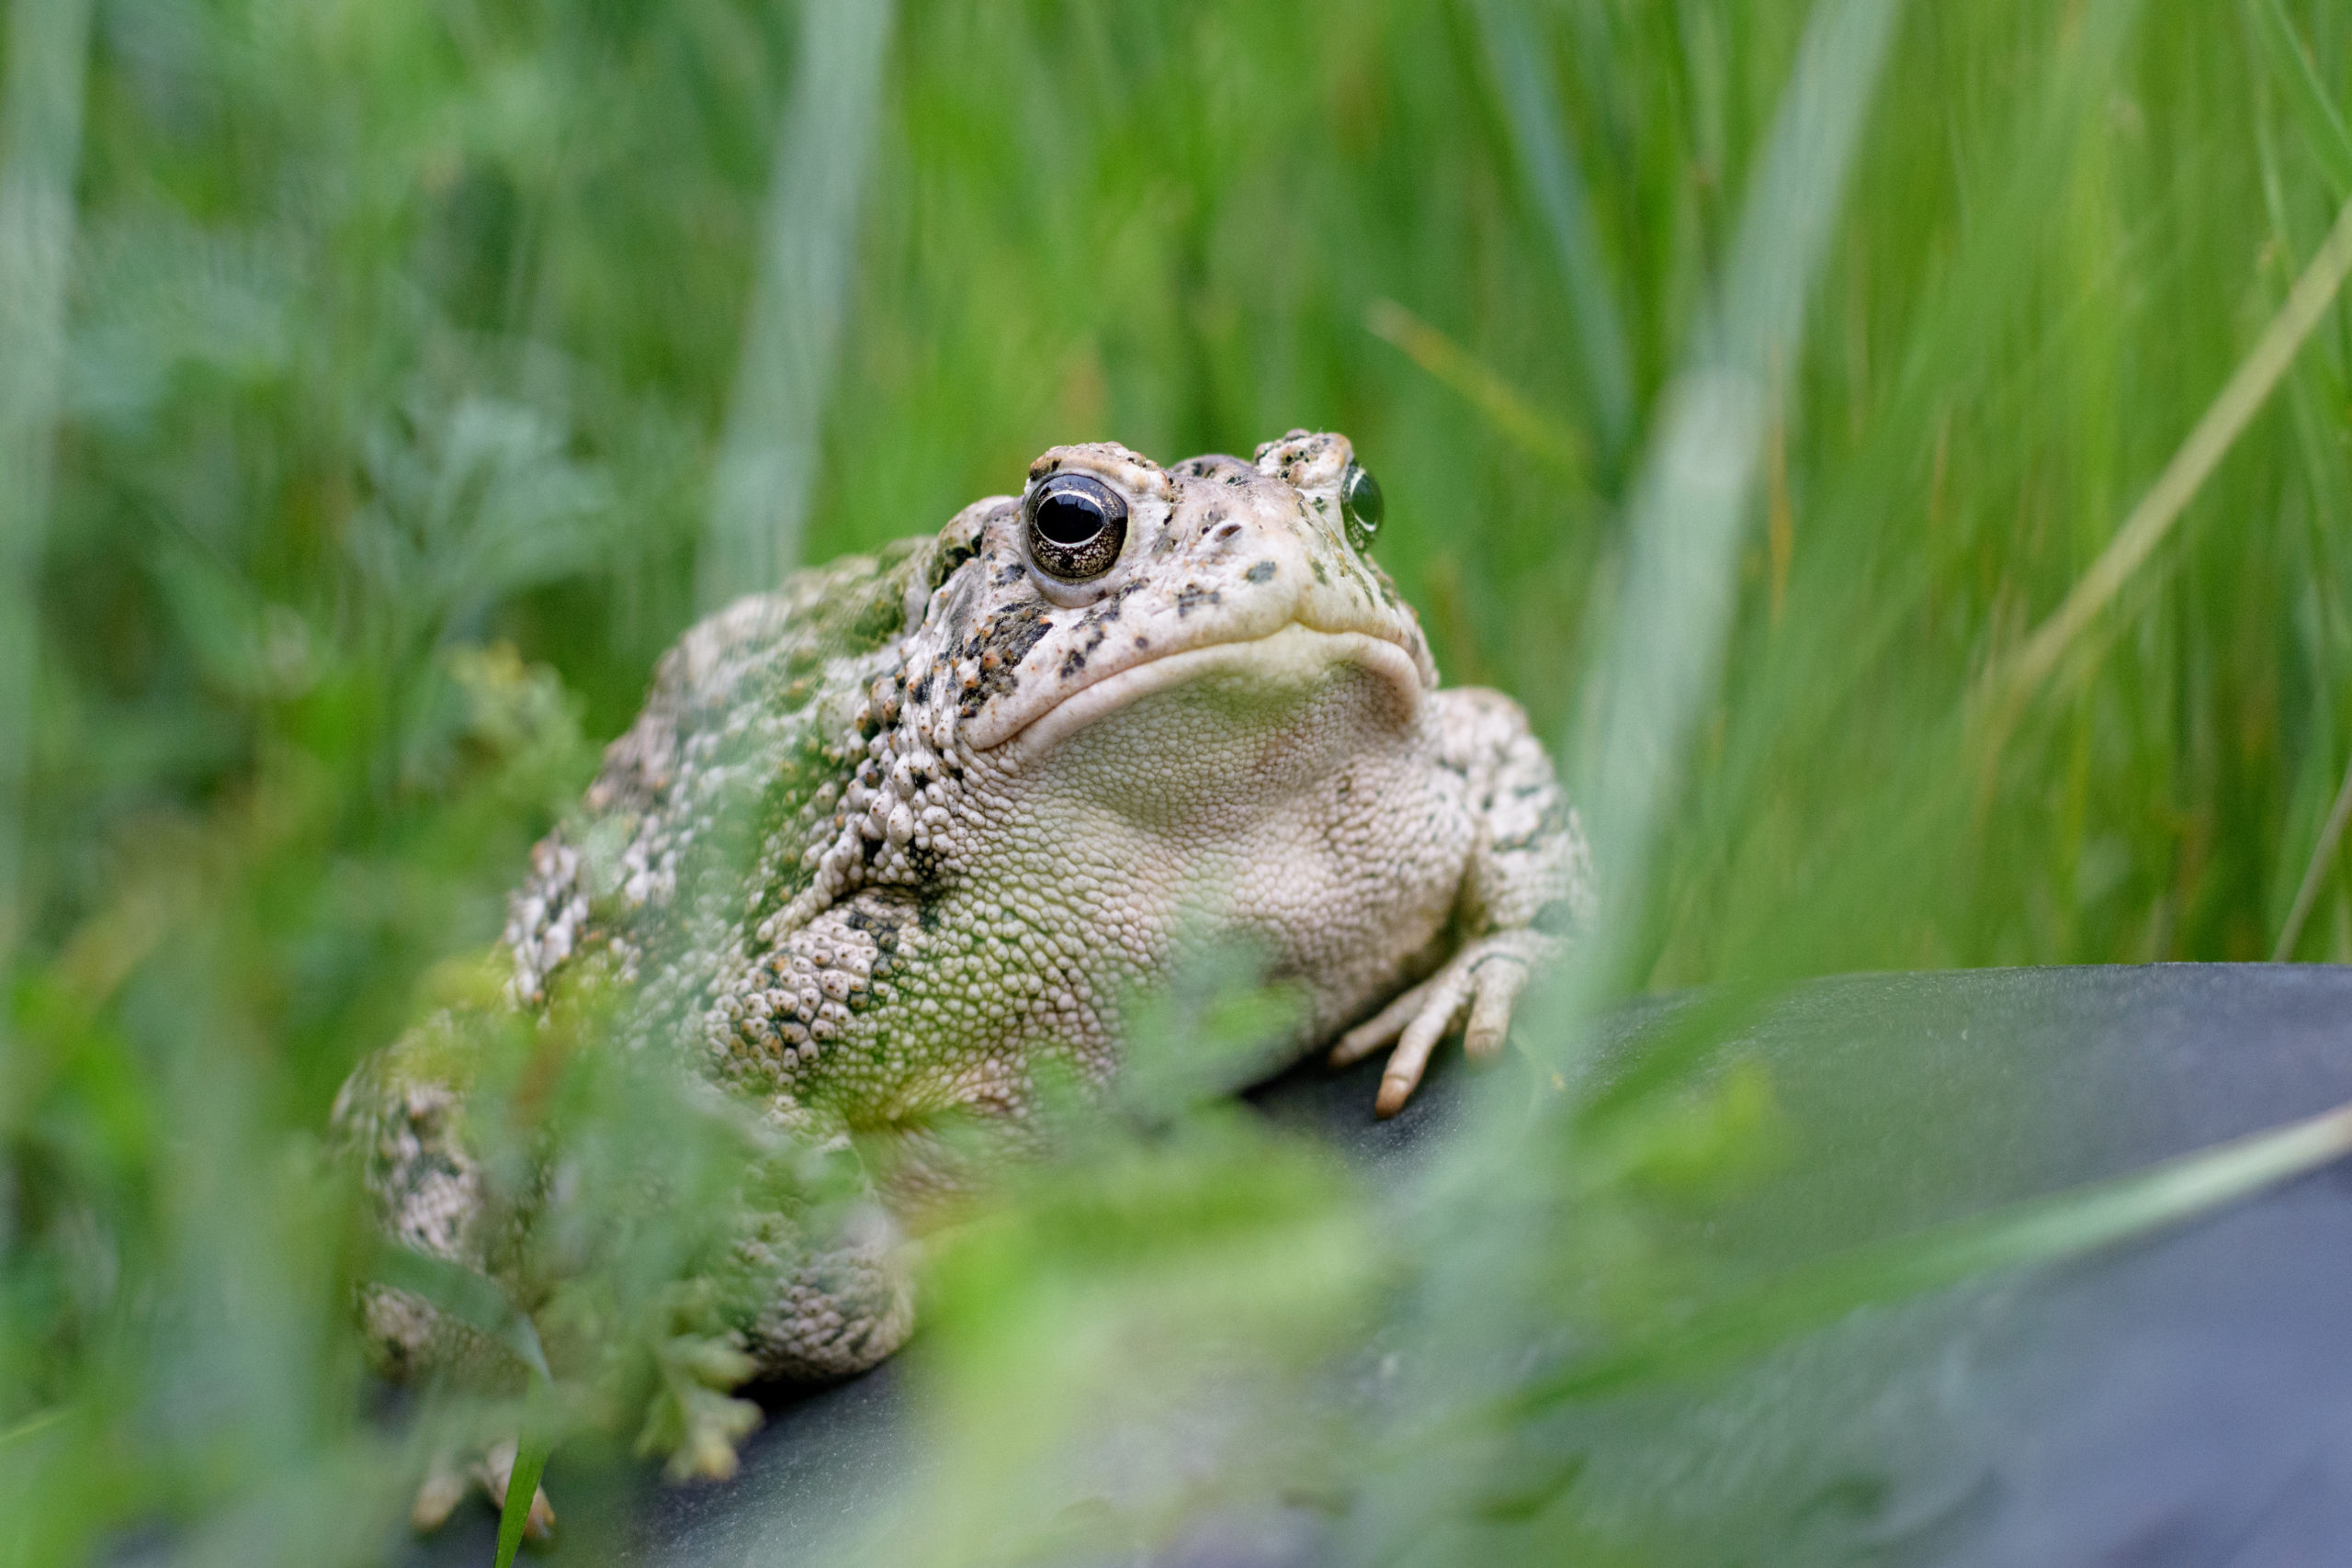 Close up photo of a wild toad on a rubber tire in the tall grass.